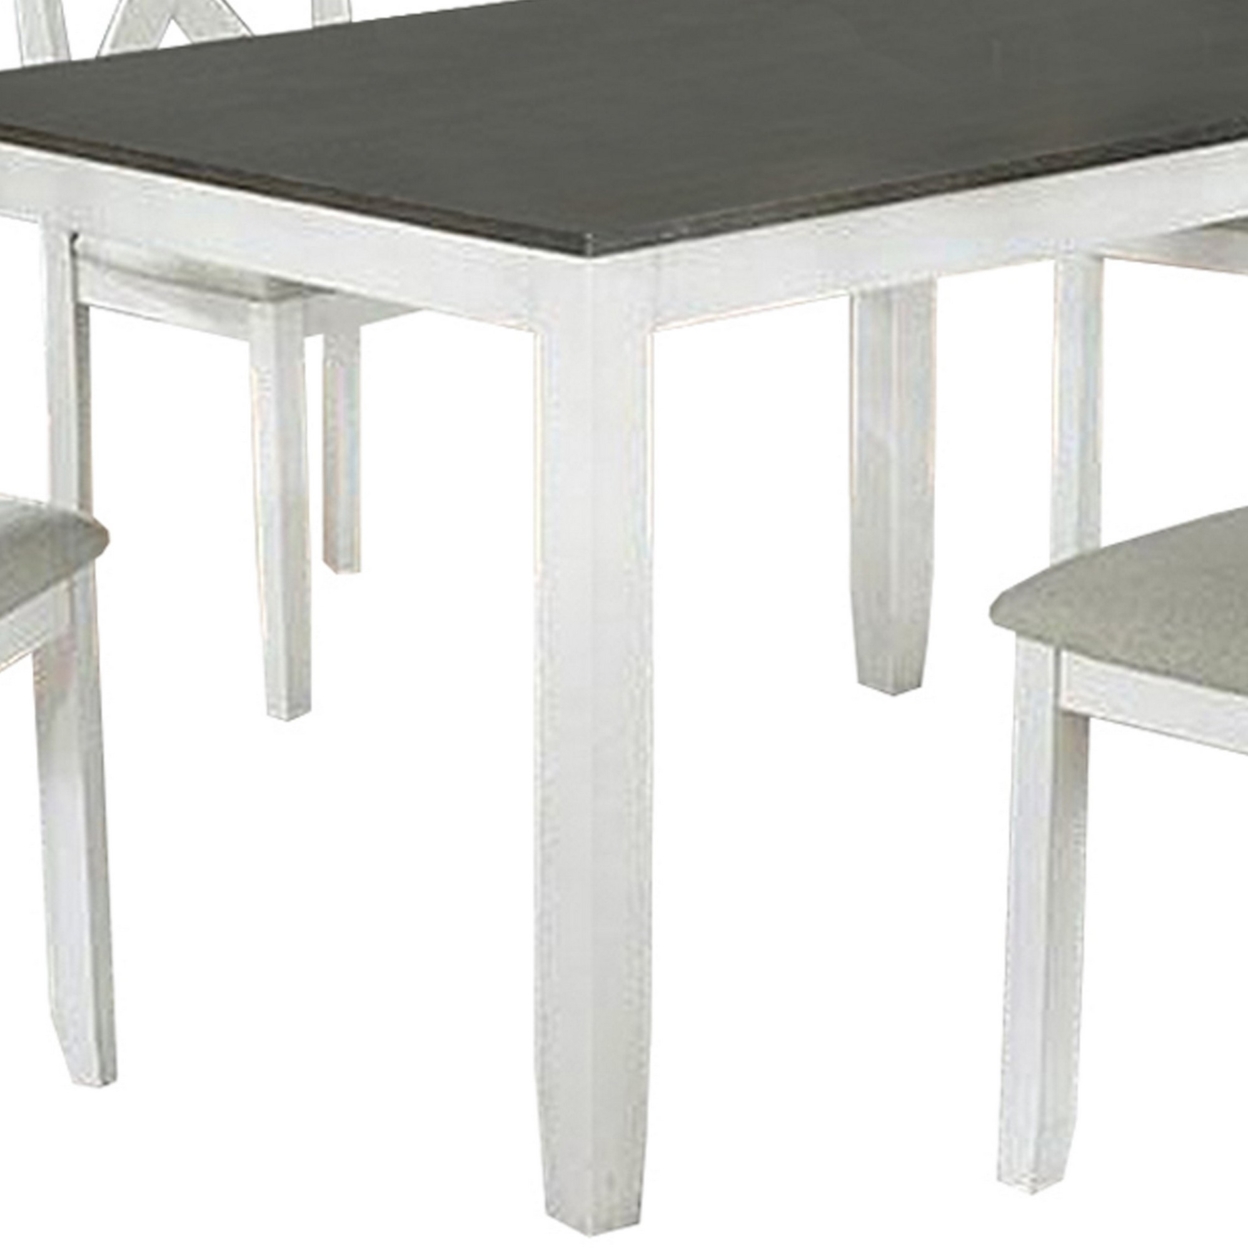 5 Piece Dining Table Set With Padded Seat And X Back, White- Saltoro Sherpi